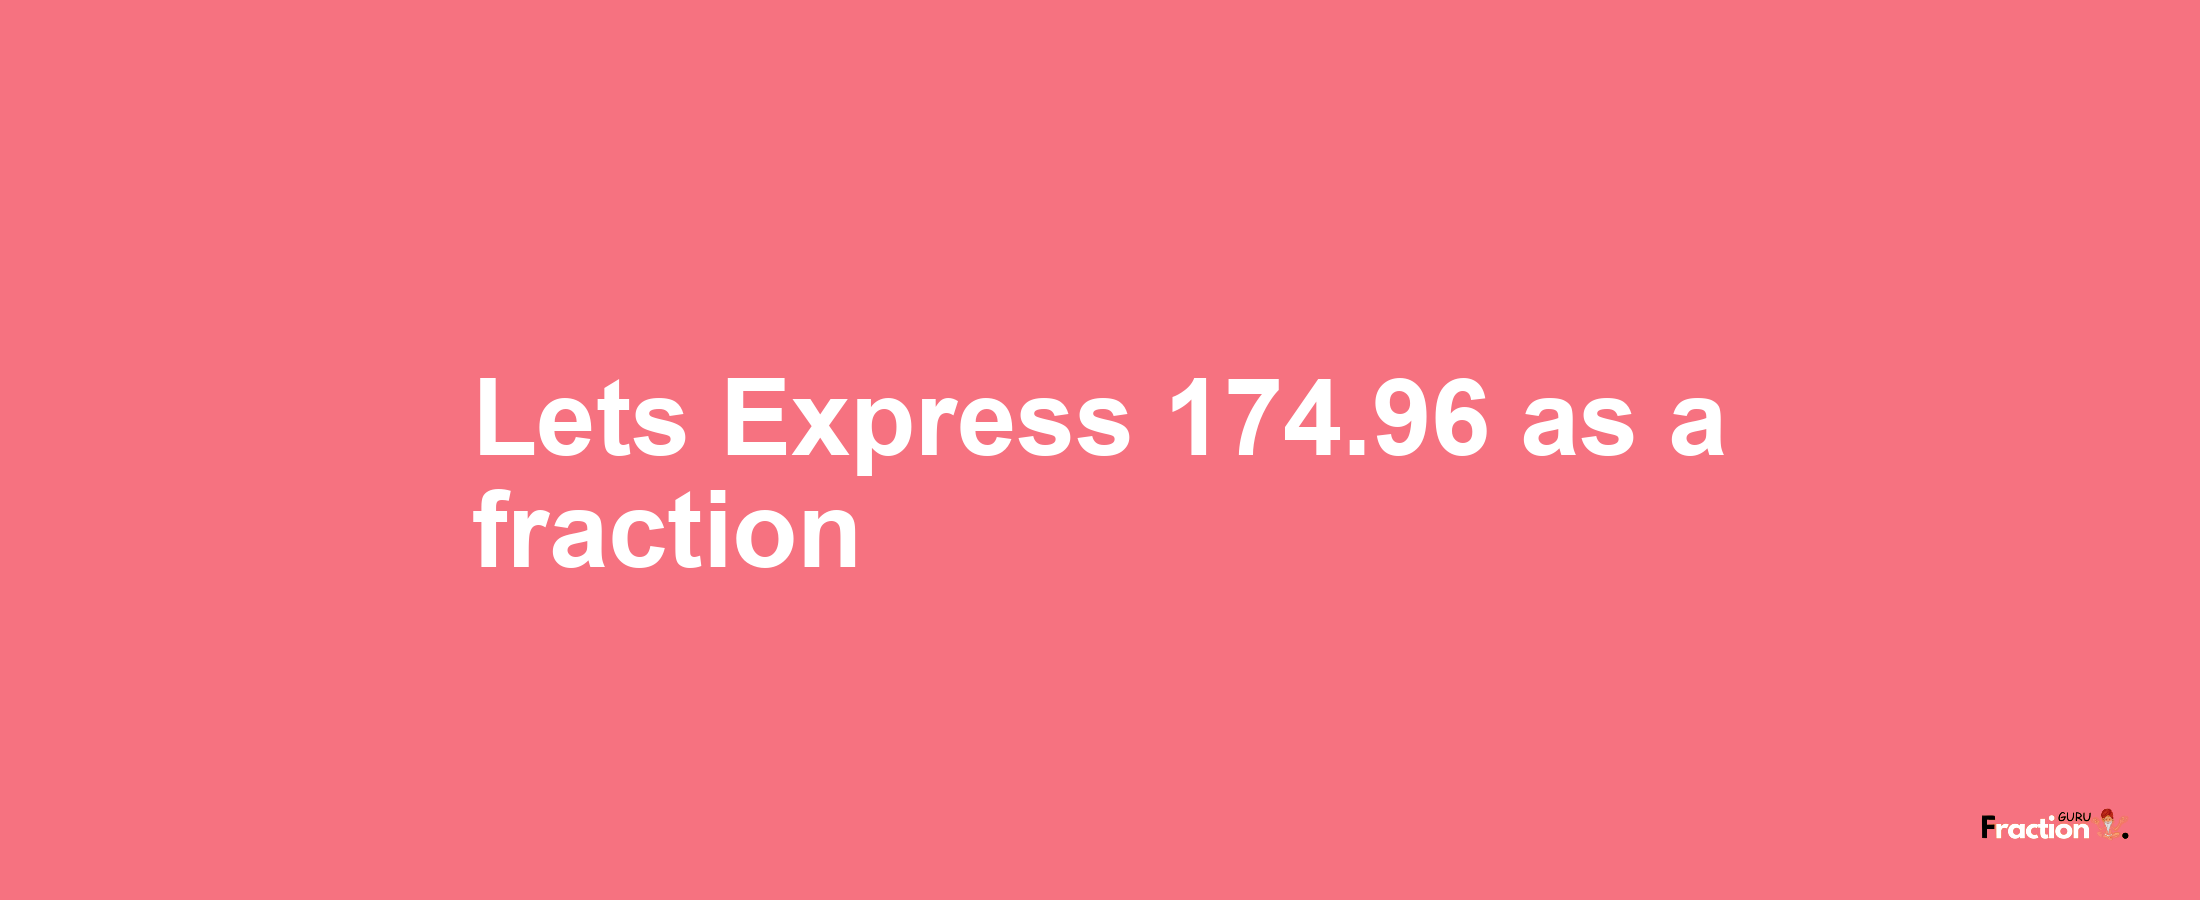 Lets Express 174.96 as afraction